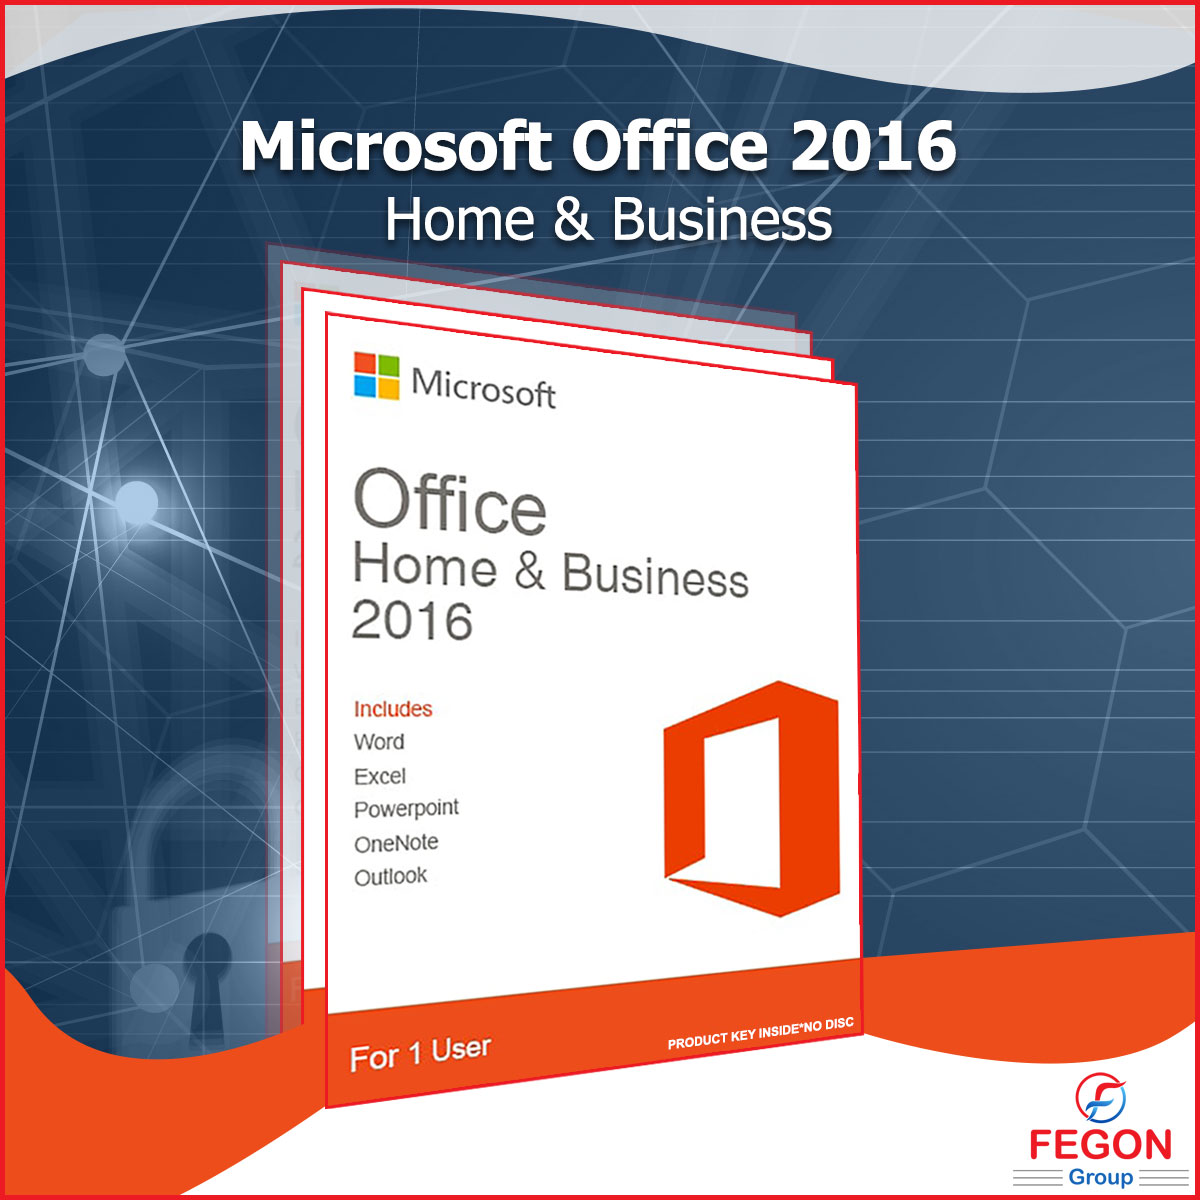 Buy Microsoft Office 2016 Home & Business it will be delivered to you in less than 30 minutes. To know more about services contact us 1-844-513-4111, or click here bit.ly/35HnEYQ
#buynow #Microsoftoffice2016 #homeandbusiness #Software